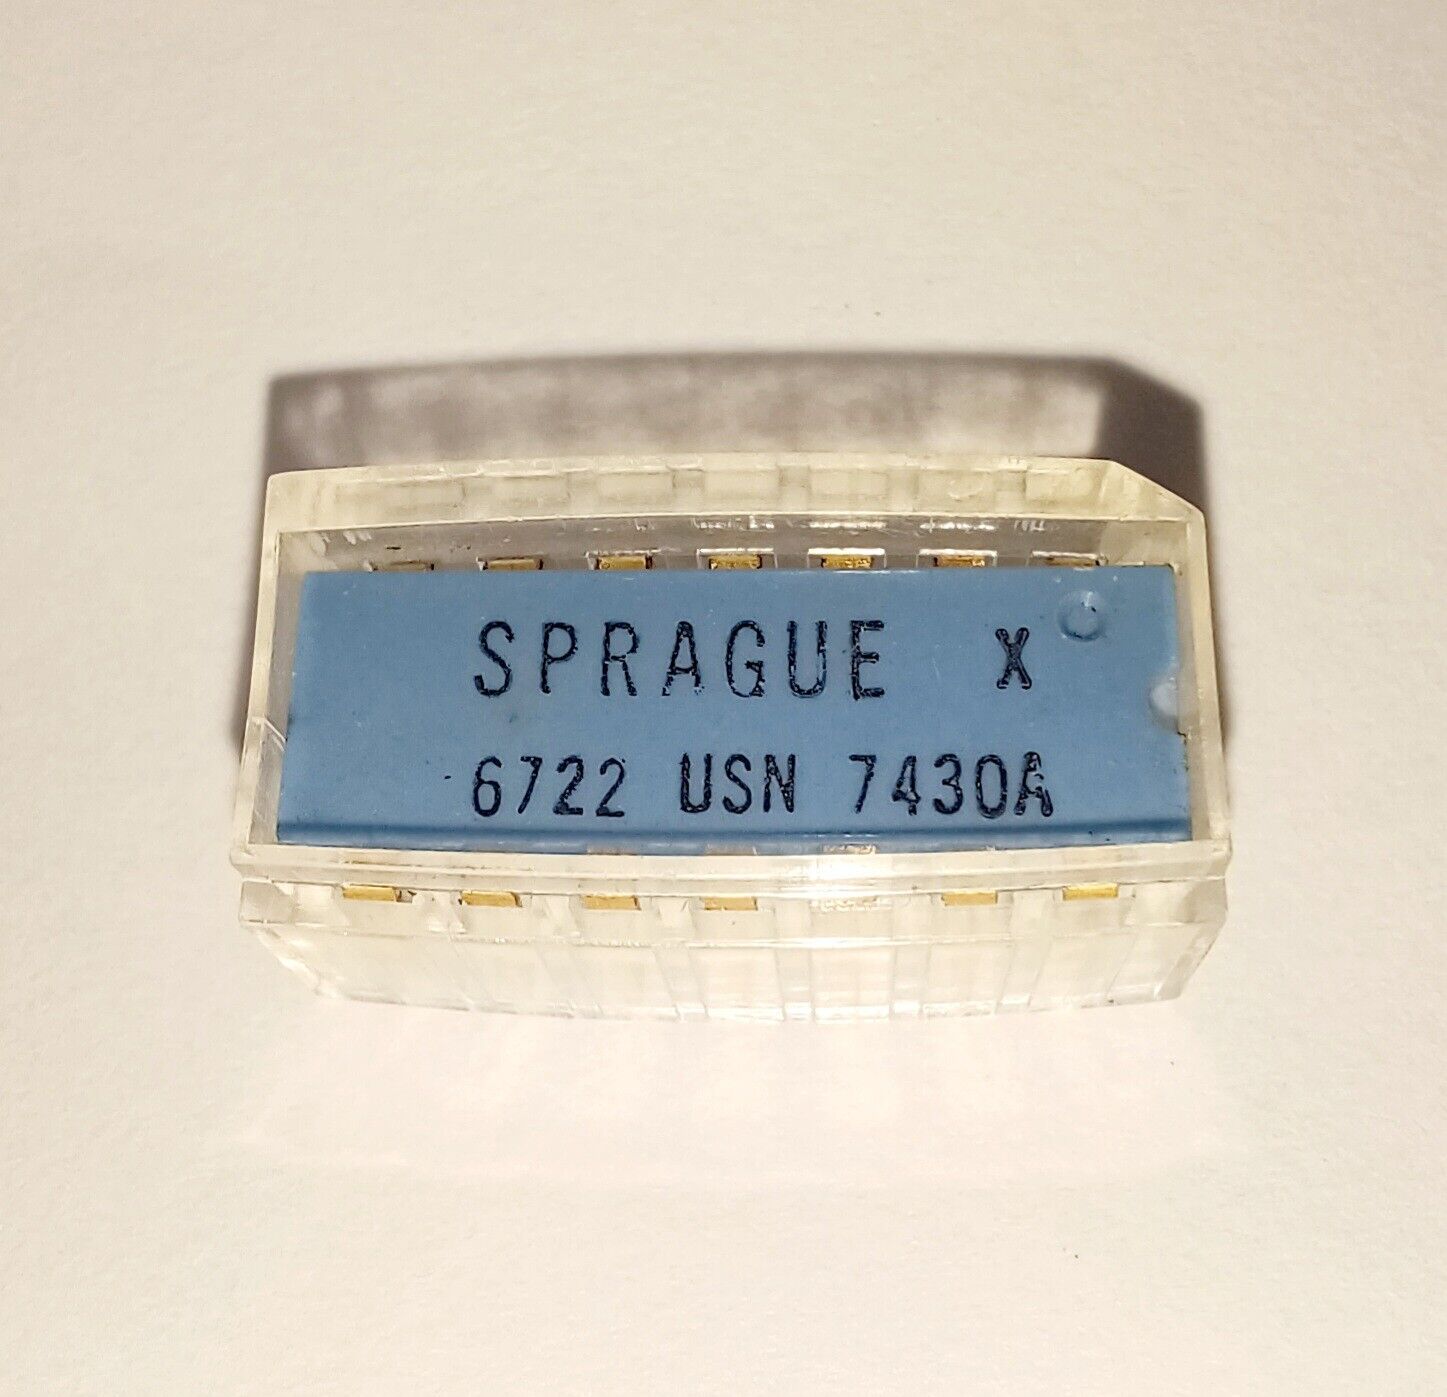 Sprague USN 7430A IC chip microchip DIP-14 vintage from 1967 Gold plated legs